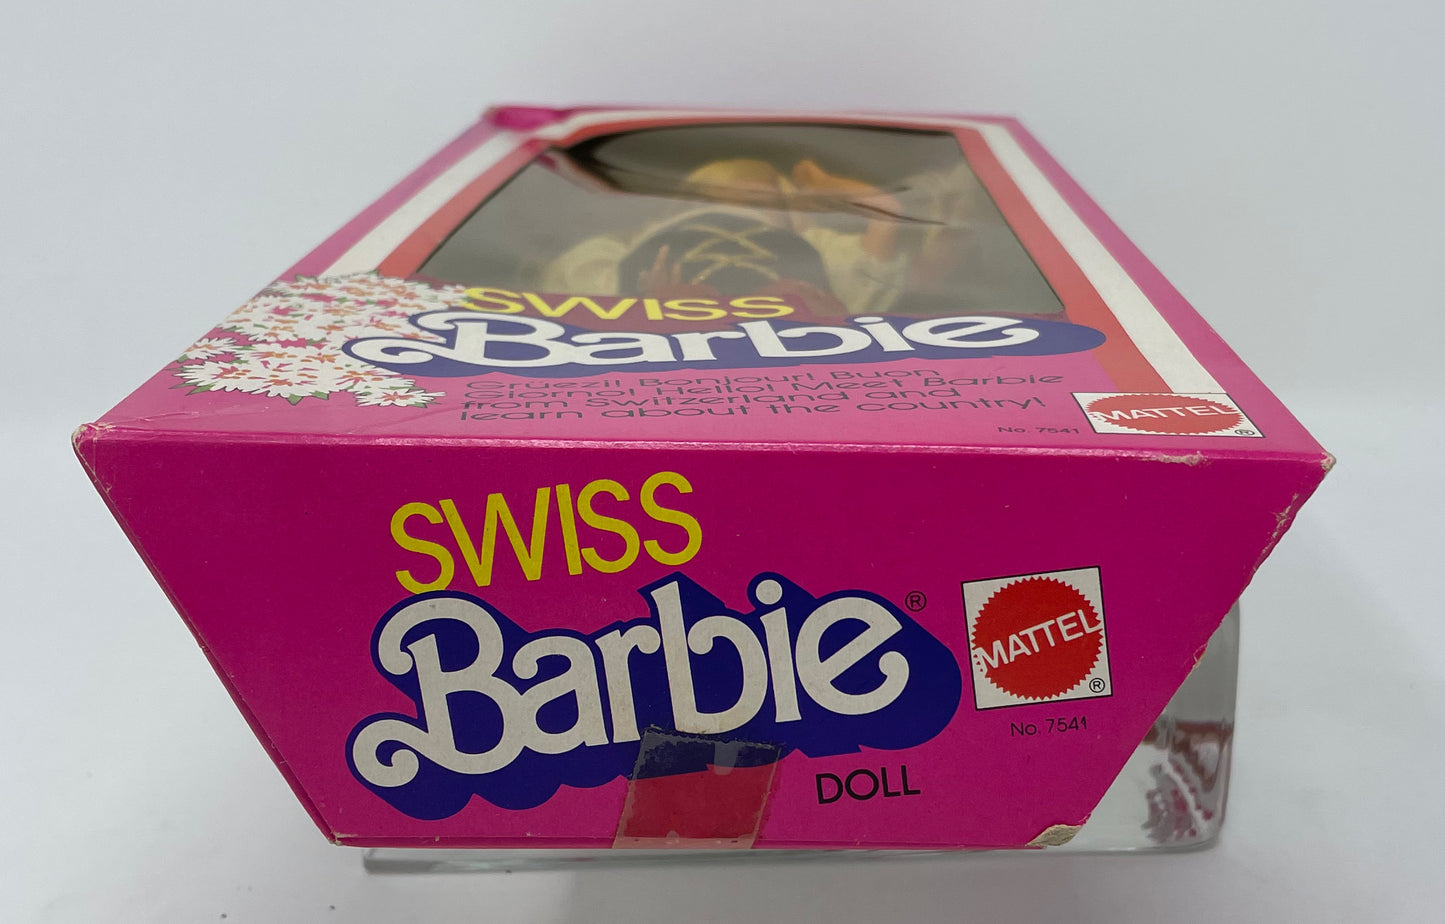 SWISS BARBIE - BARBIE DOLLS OF THE WORLD COLLECTION #7541 - MATTEL 1983